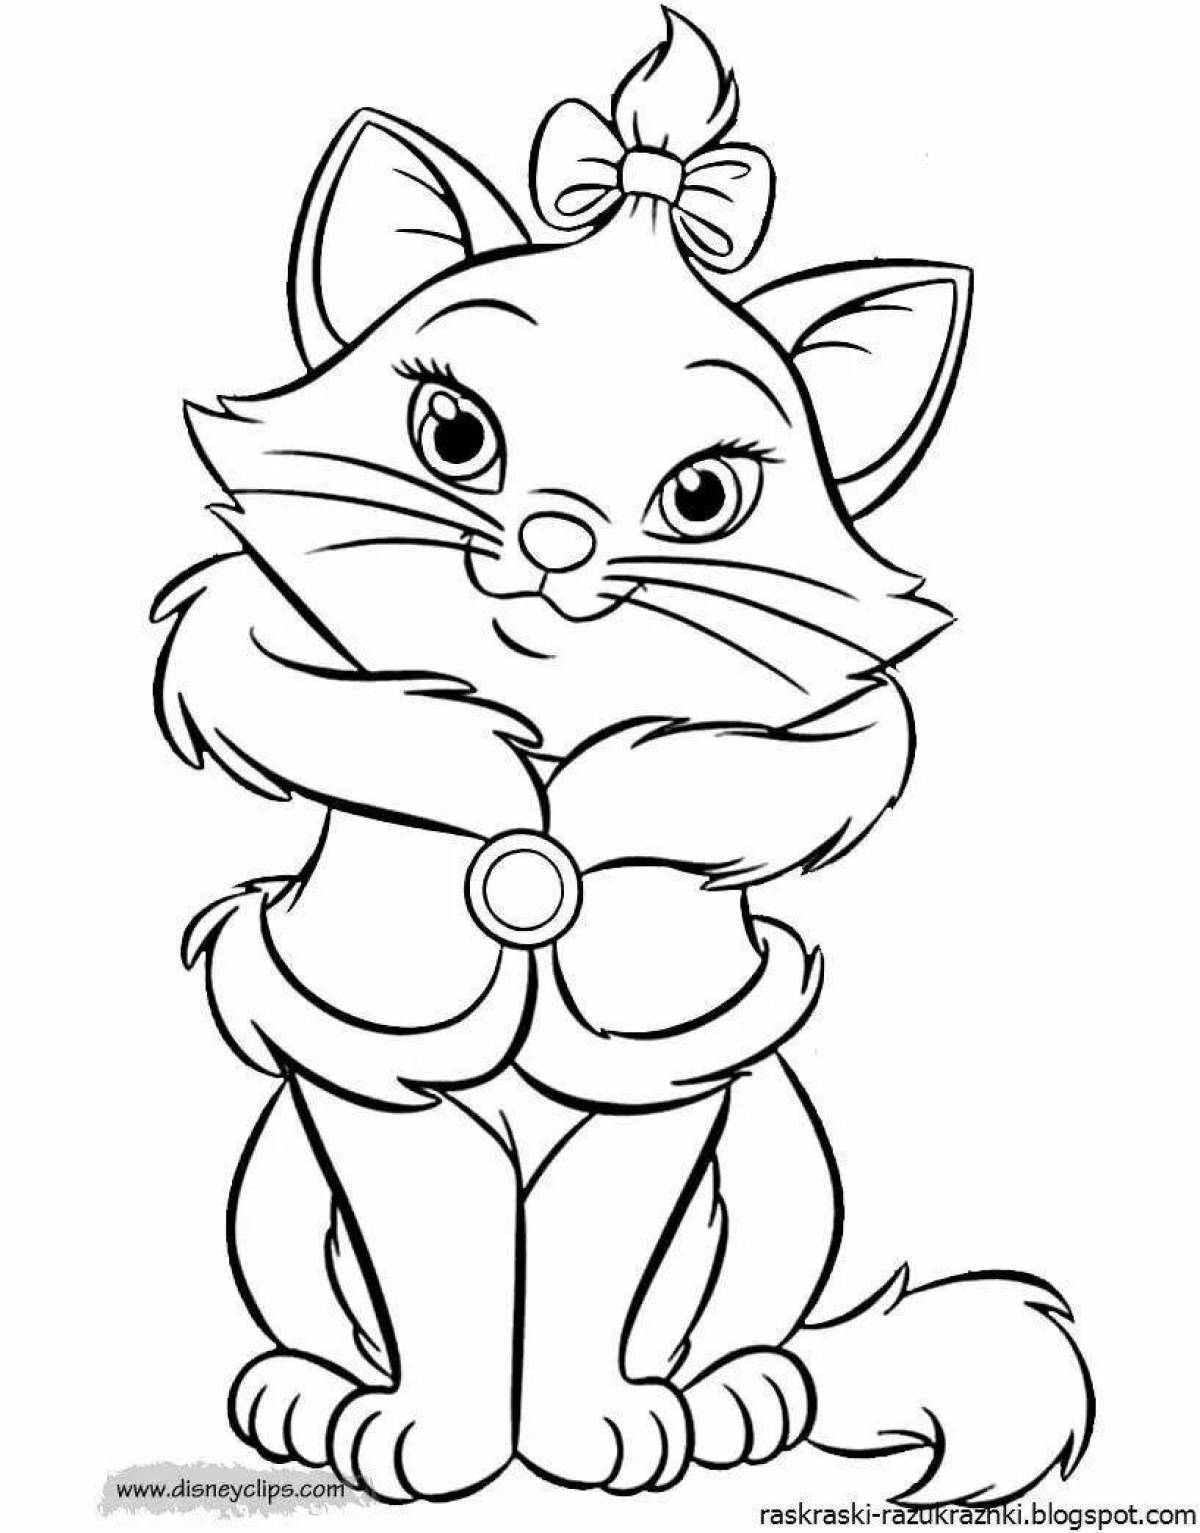 Christmas coloring book sparkling cat